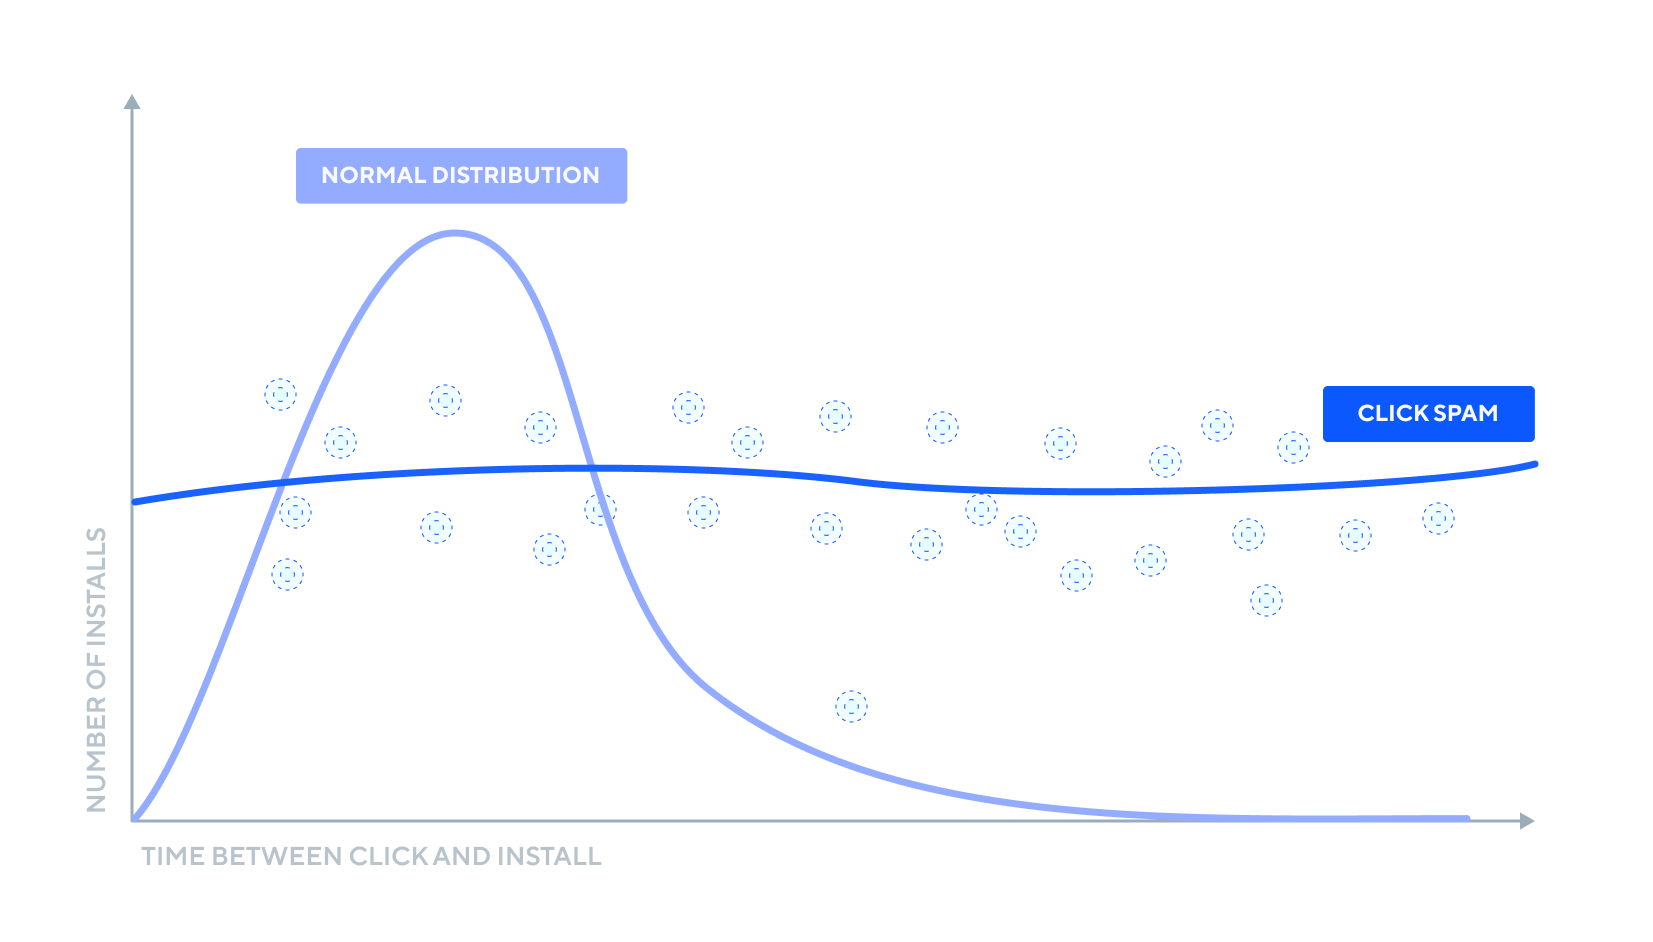 A visual representation of how the click-to-install-time distribution on campaigns affected by click spam is spread out across the entire attribution window. 